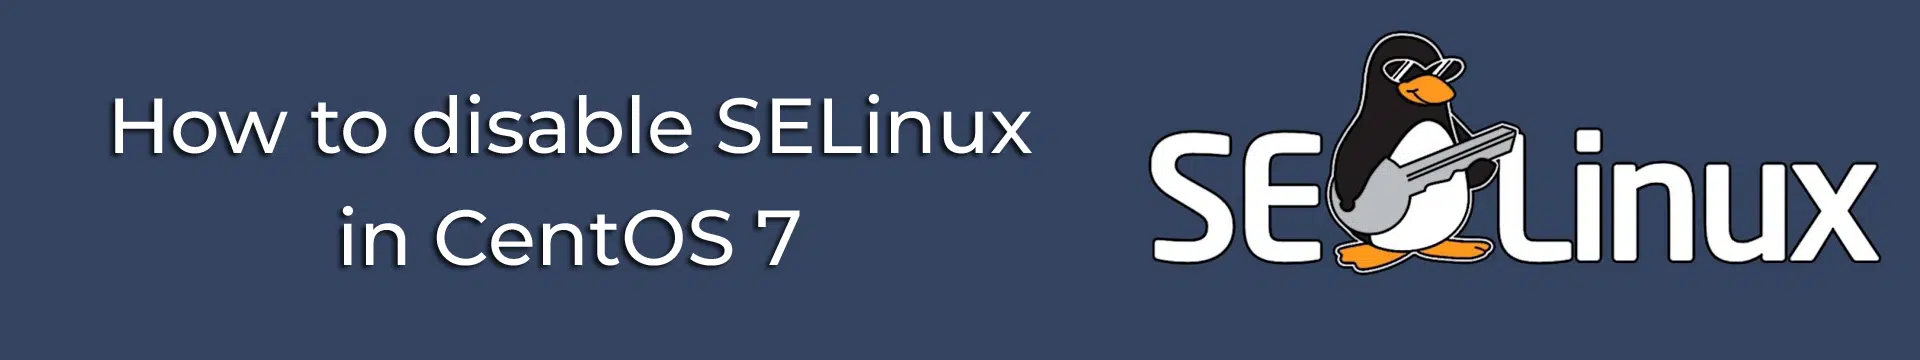 How to disable SELinux on CentOS 7